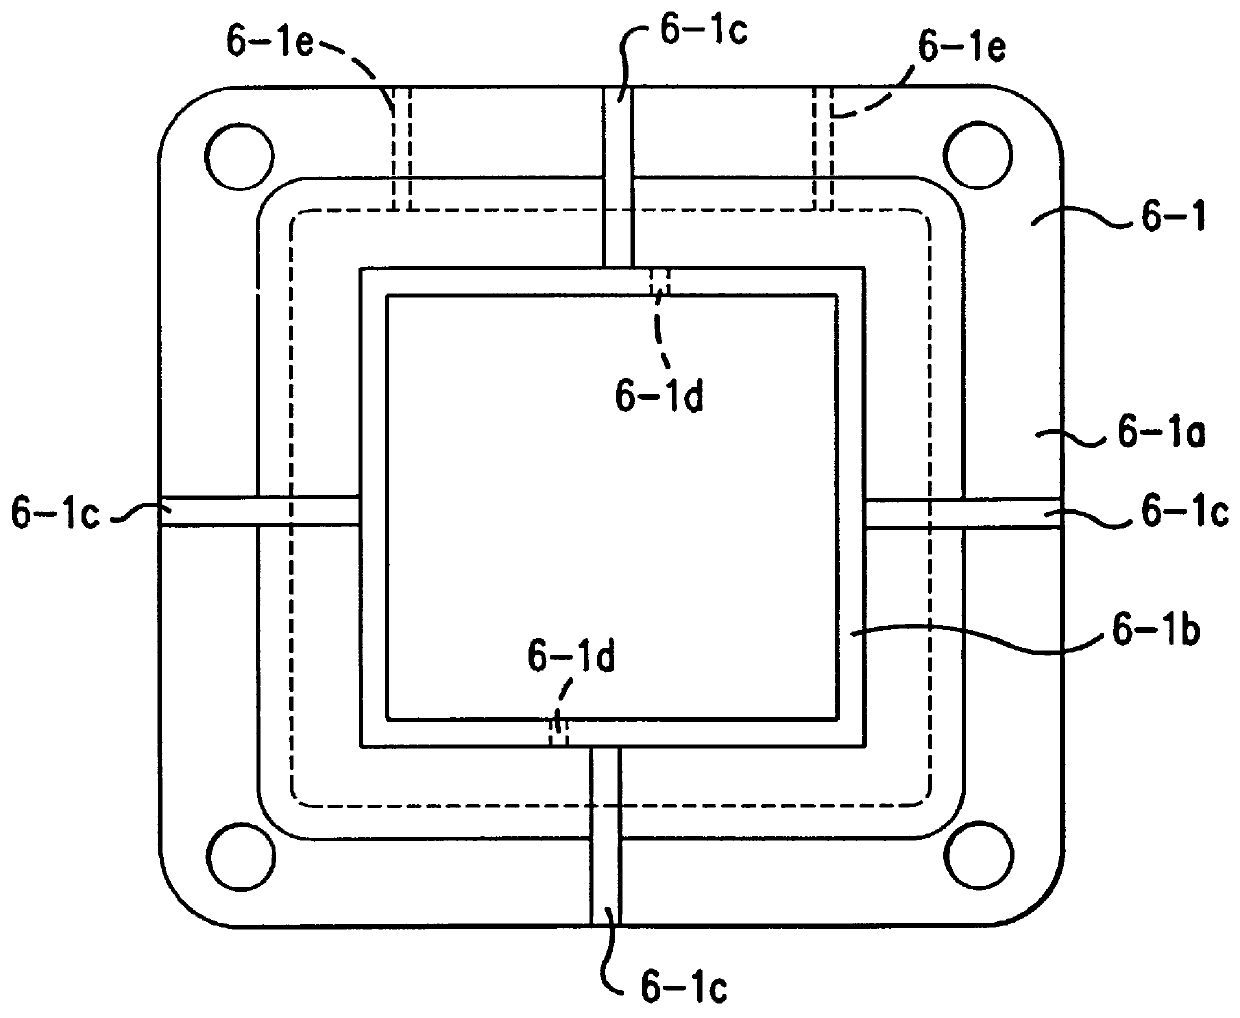 Thermoelectric apparatus